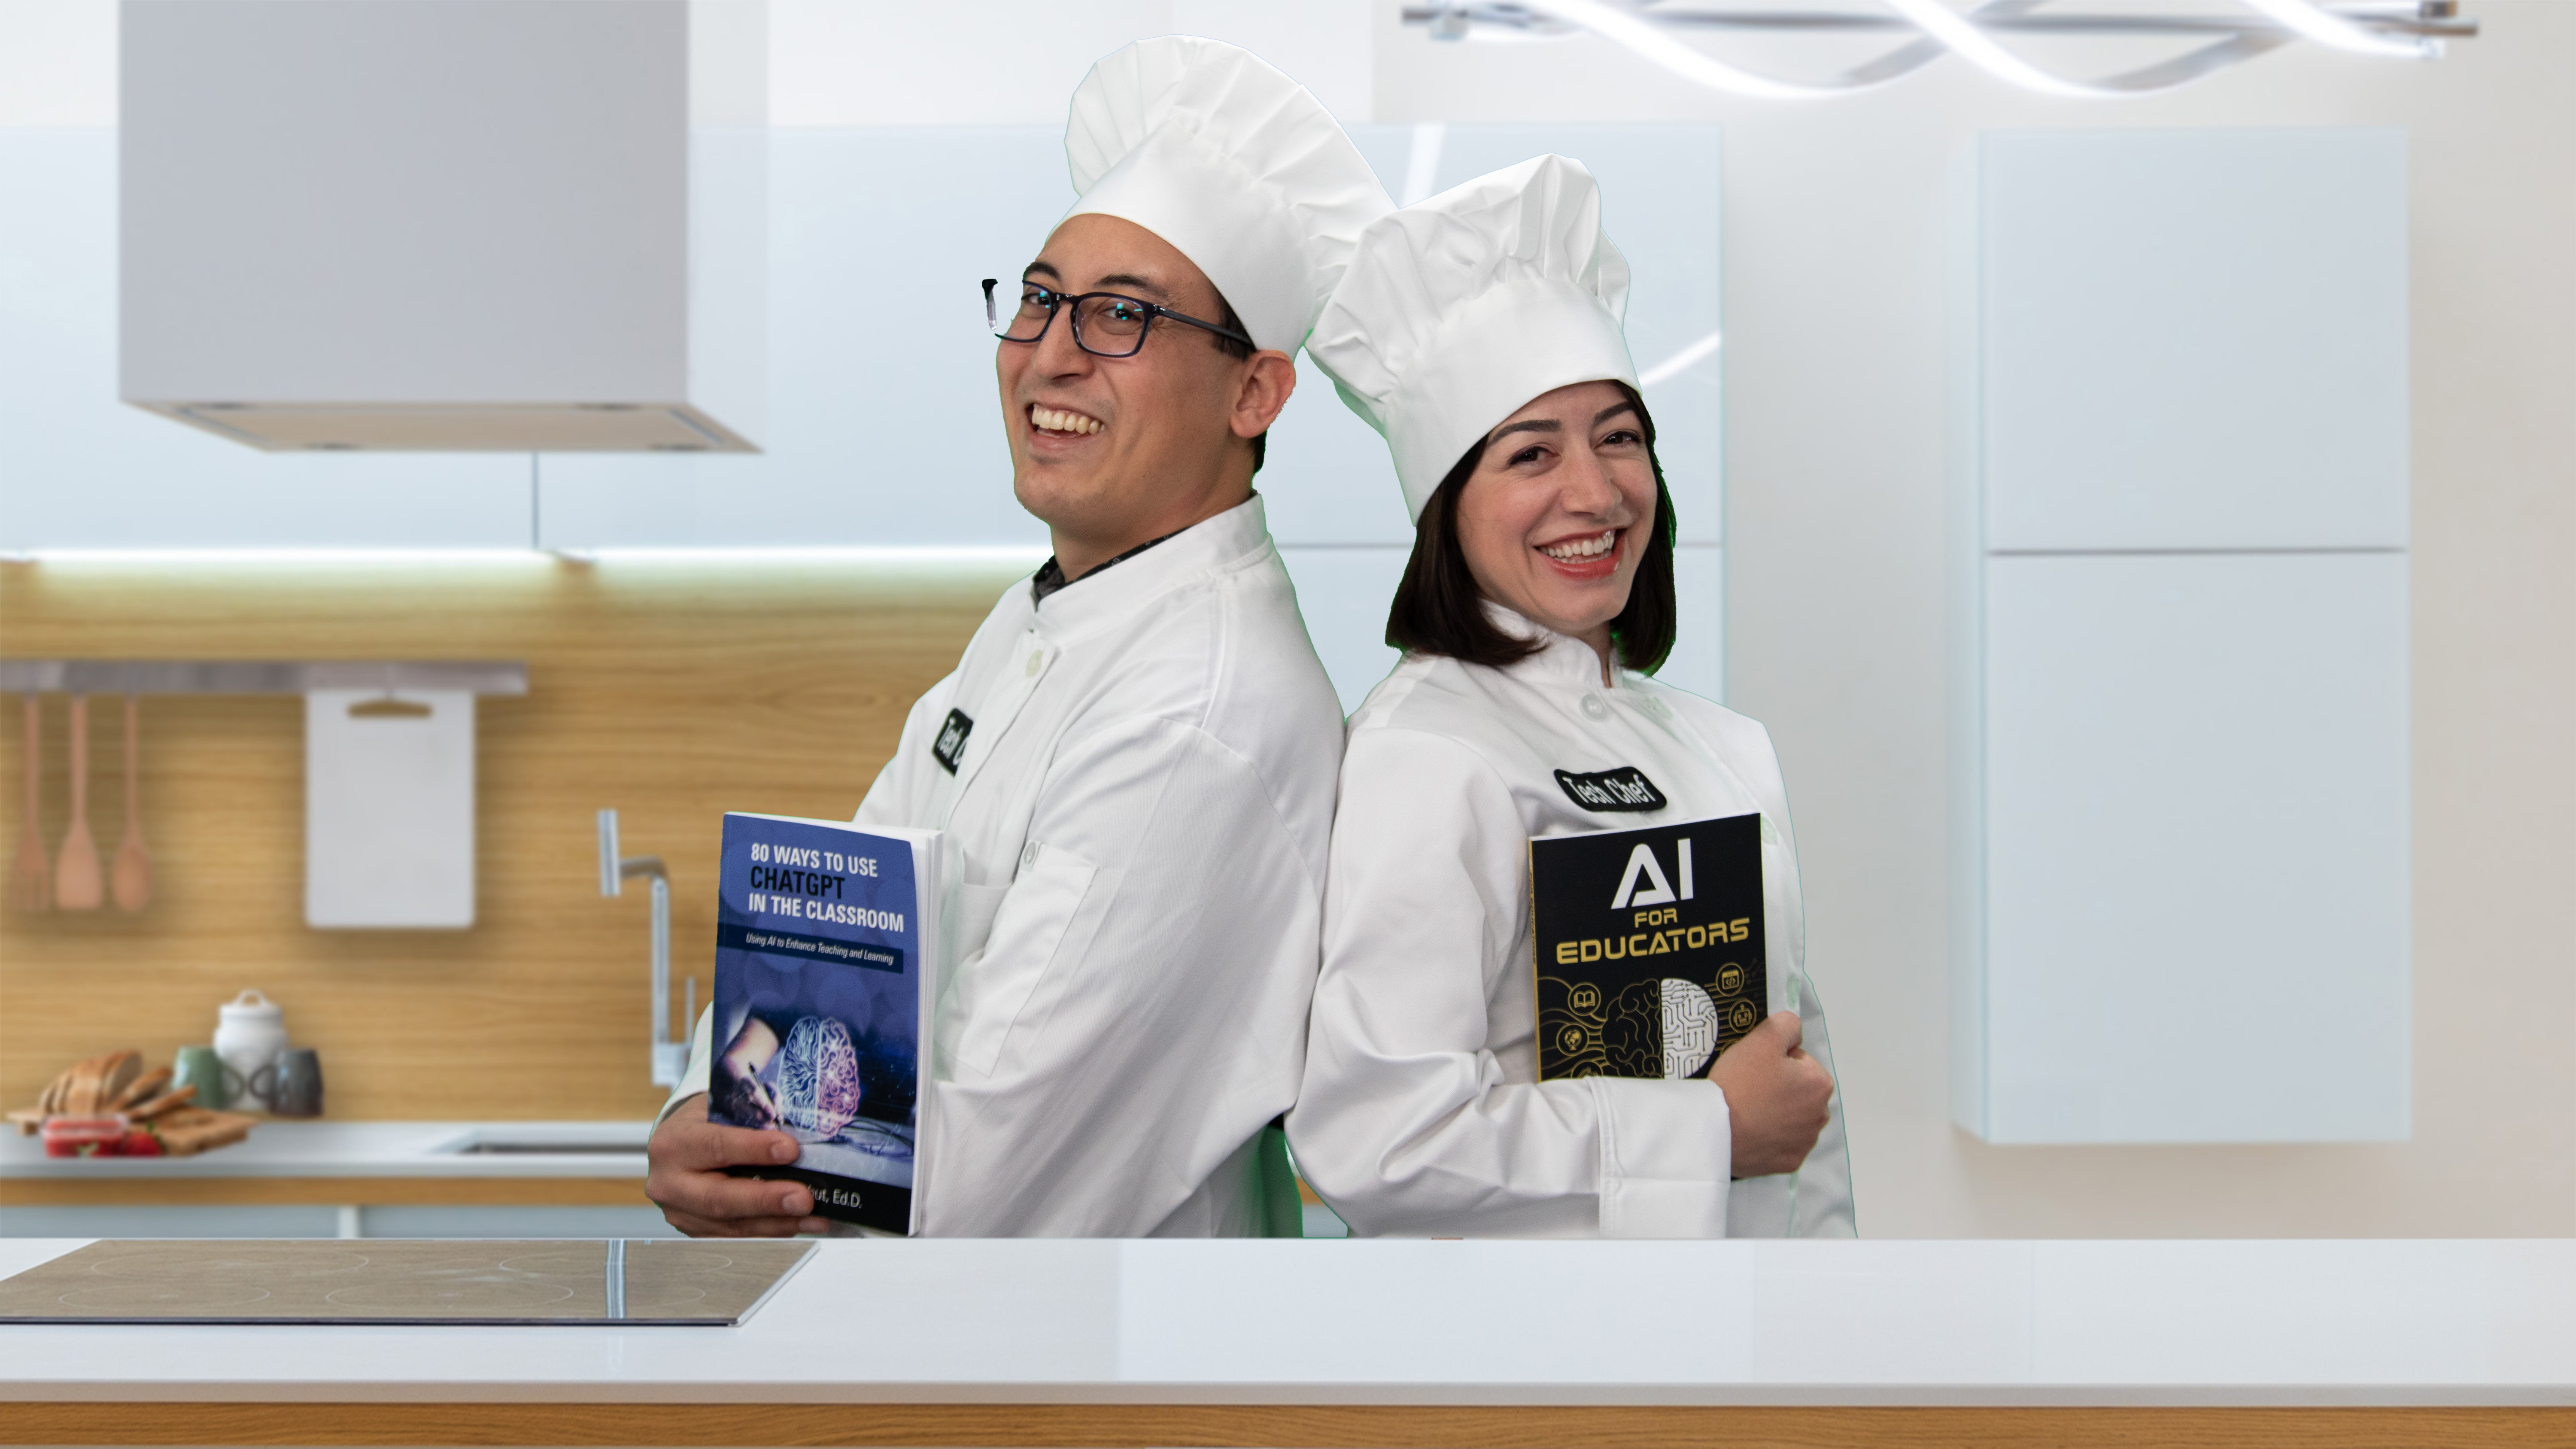 Chris Sharp and Leslie Mojeiko dressed up as culinary chefs and holding books about teaching with AI